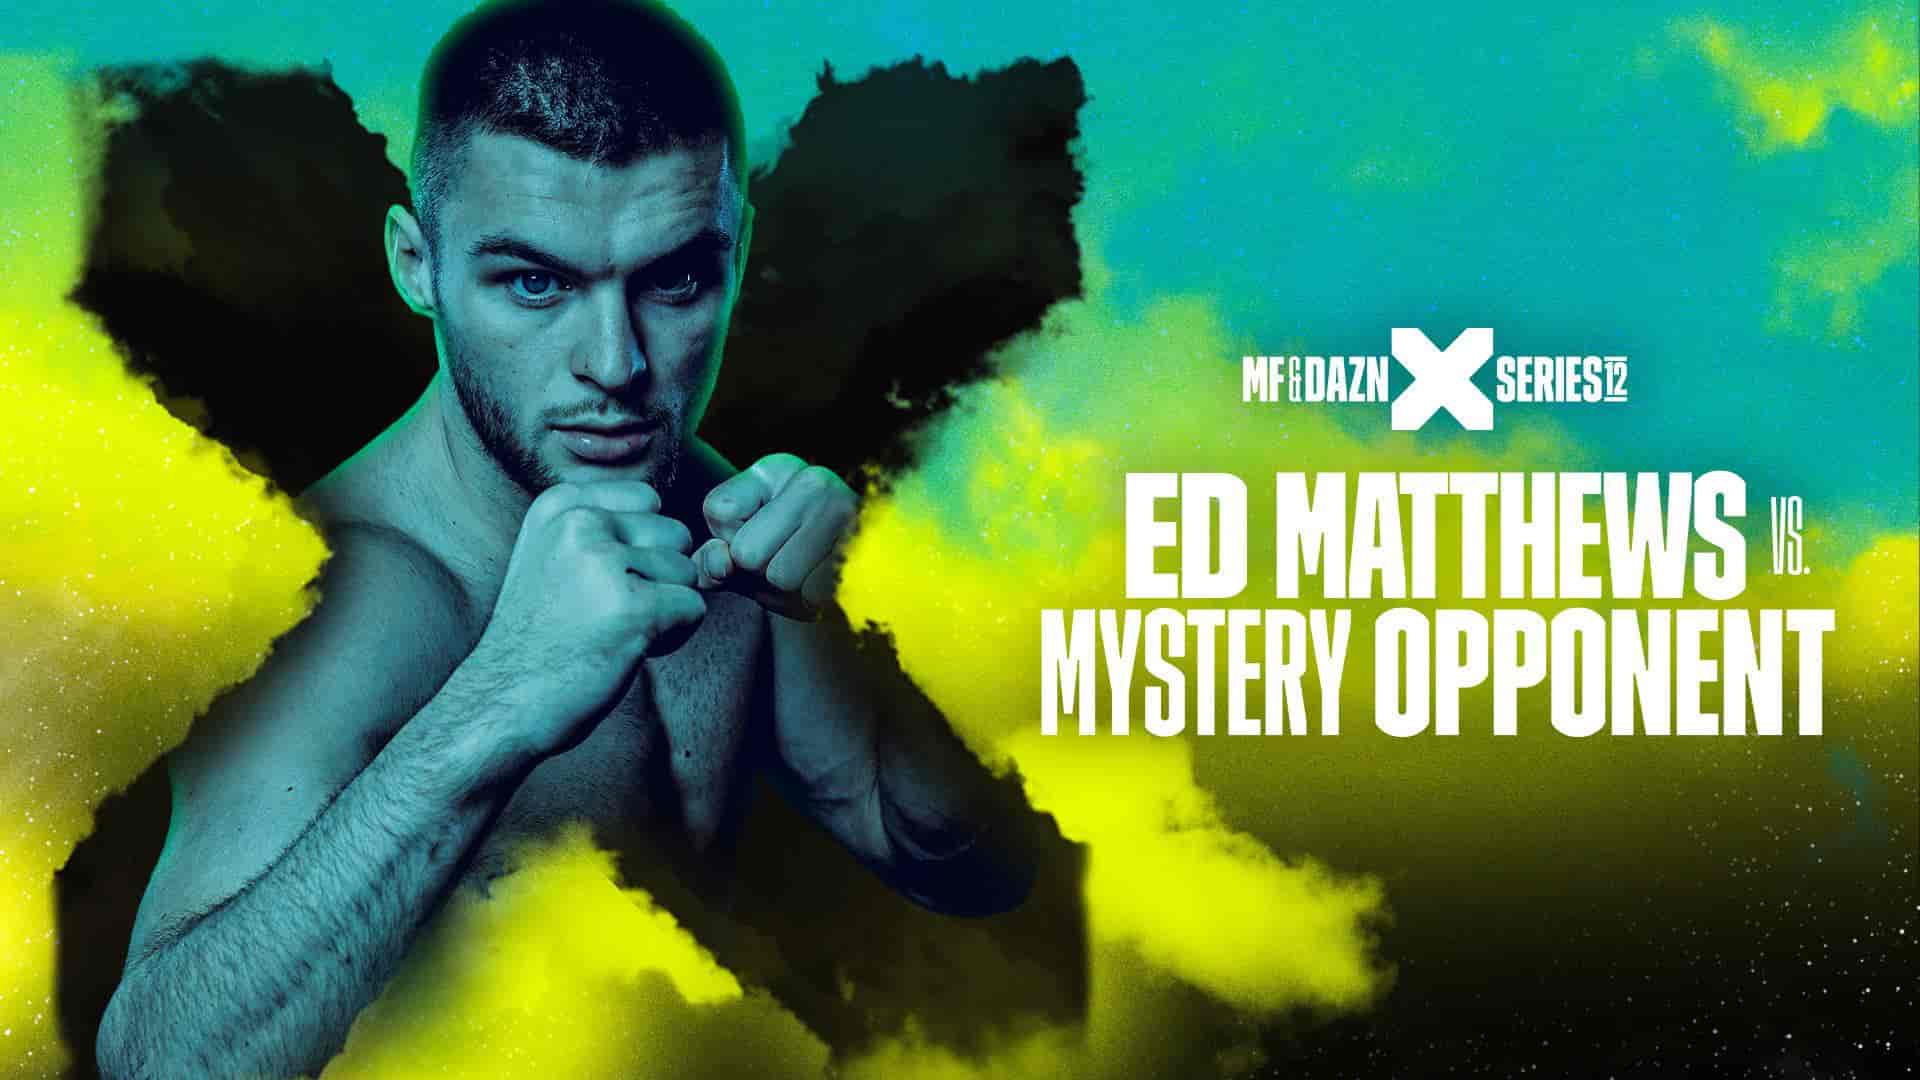 ED Matthews going to compete against whom?